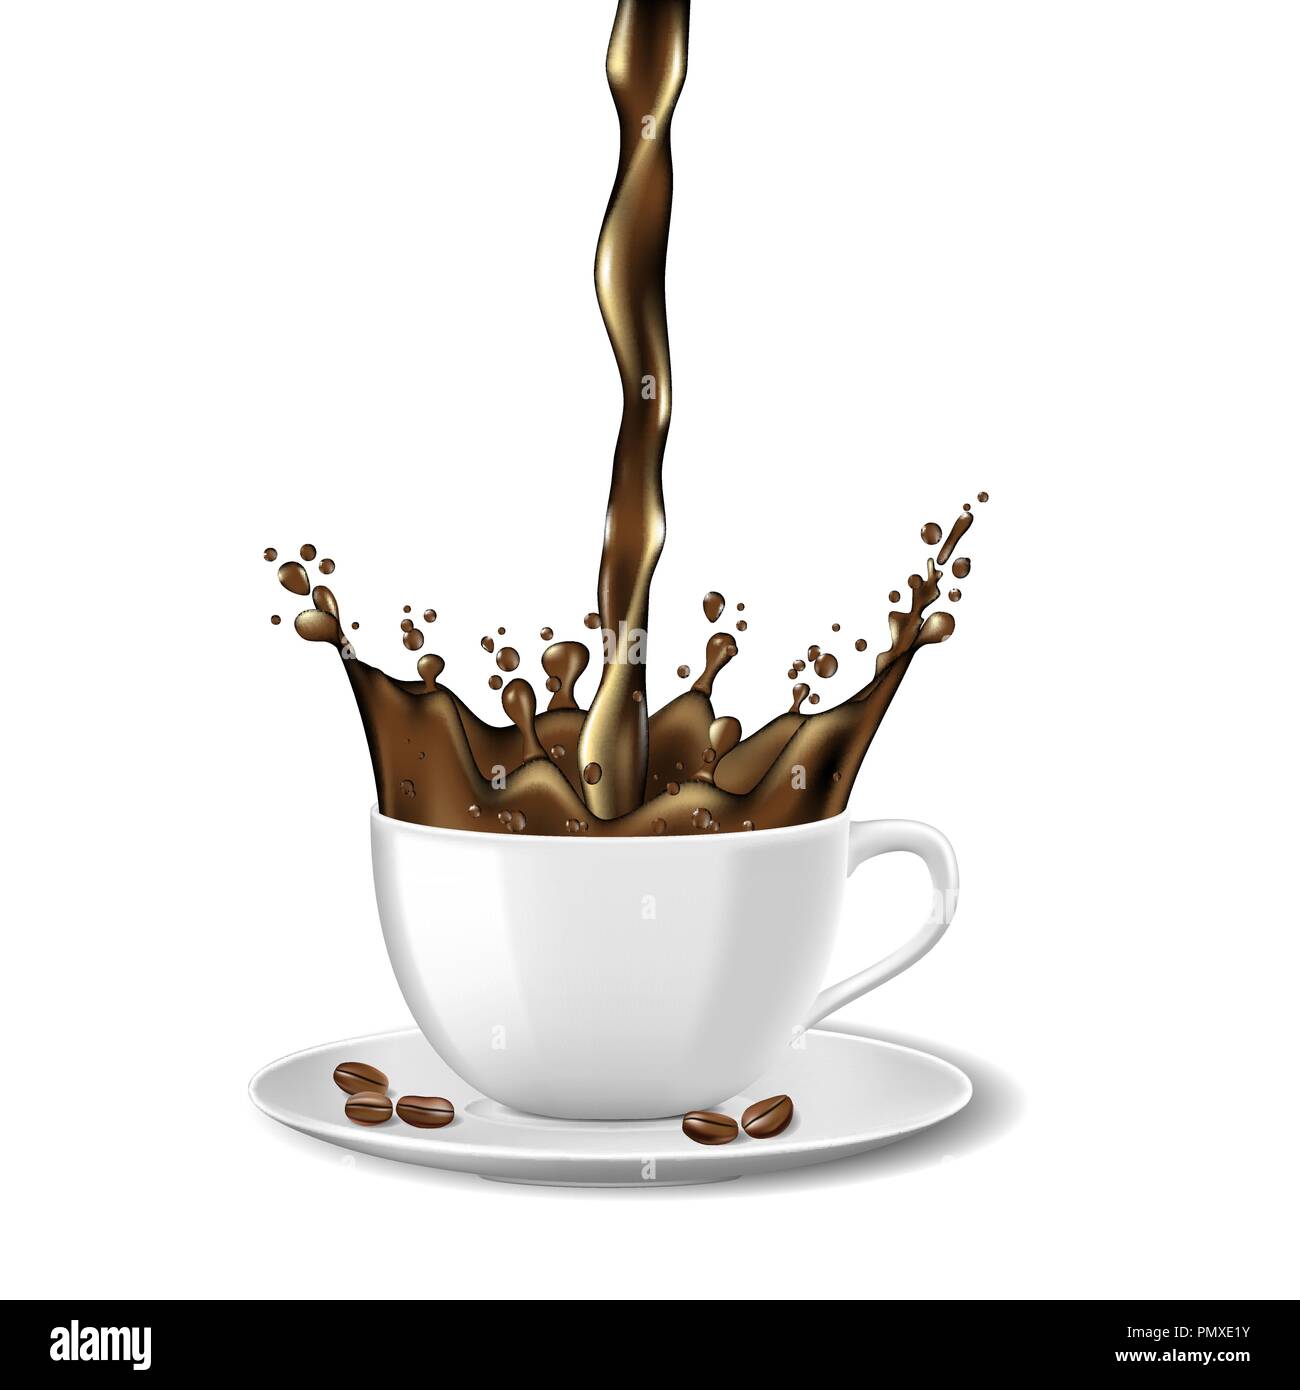 https://c8.alamy.com/comp/PMXE1Y/black-instant-coffee-cup-and-beans-ads-design-hot-coffee-mug-with-splash-isolated-on-white-vector-3d-illustration-PMXE1Y.jpg